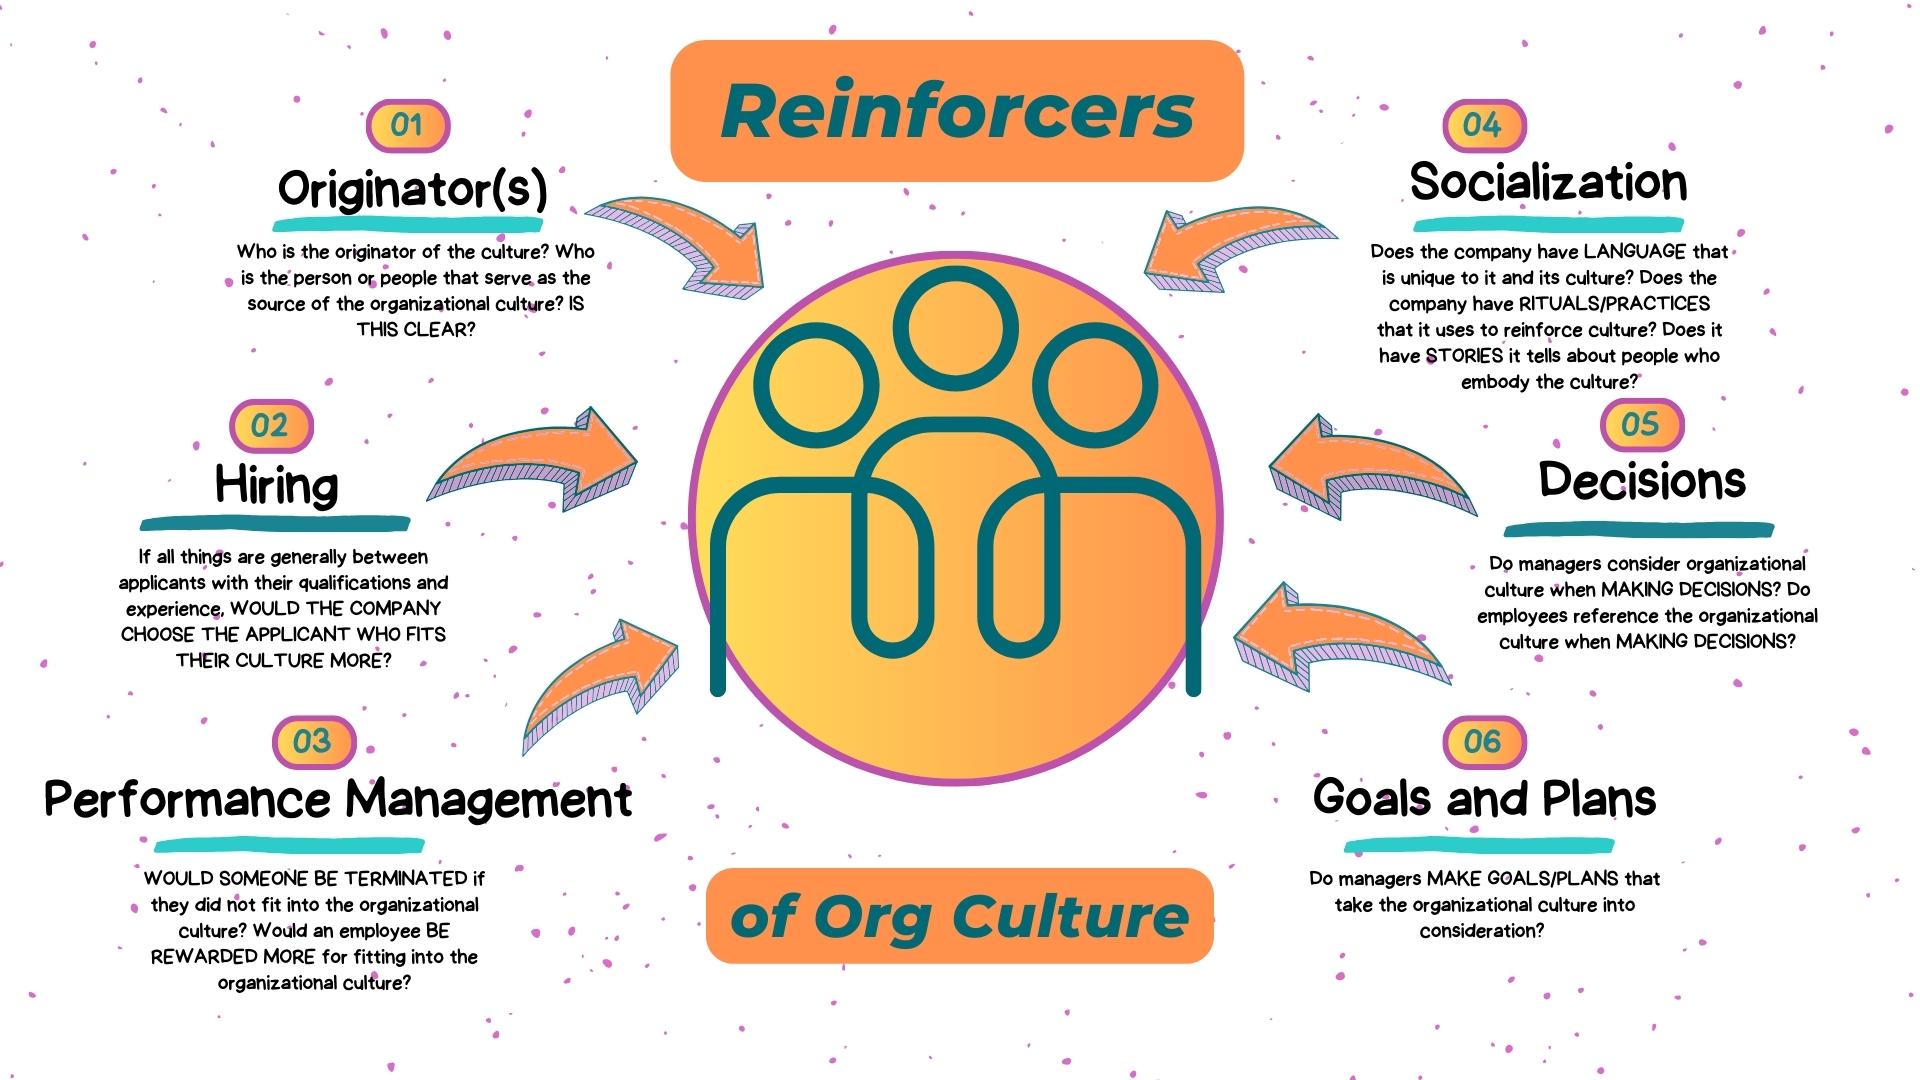 Reinforcers of Organizational CultureOriginators - Who is the originator of the culture? Who is the person or people that serve as the source of the organizational culture? IS THIS CLEAR? Hiring - If all things are generally between applicants with their qualifications and experience, WOULD THE COMPANY CHOOSE THE APPLICANT WHO FITS THEIR CULTURE MORE? Performance Management - WOULD SOMEONE BE TERMINATED if they did not fit into the organizational culture? Would an employee BE REWARDED MORE for fitting into the organizational culture? Socialization - Does the company have LANGUAGE that is unique to it and its culture? Does the company have RITUALS/PRACTICES that it uses to reinforce culture? Does it have STORIES it tells about people who embody the culture? Decisions - Do managers consider organizational culture when MAKING DECISIONS? Do employees reference the organizational culture when MAKING DECISIONS? Goals and Plans - Do managers MAKE GOALS/PLANS that take the organizational culture into consideration?